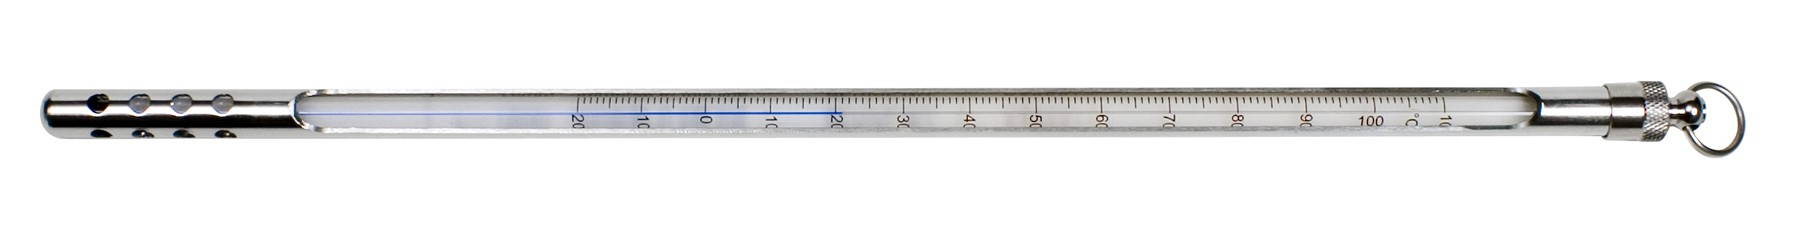 H-B DURAC Plus Armored Liquid-In-Glass Thermometer; -20 to 150C, 76mm Immersion, Organic Liquid Fill